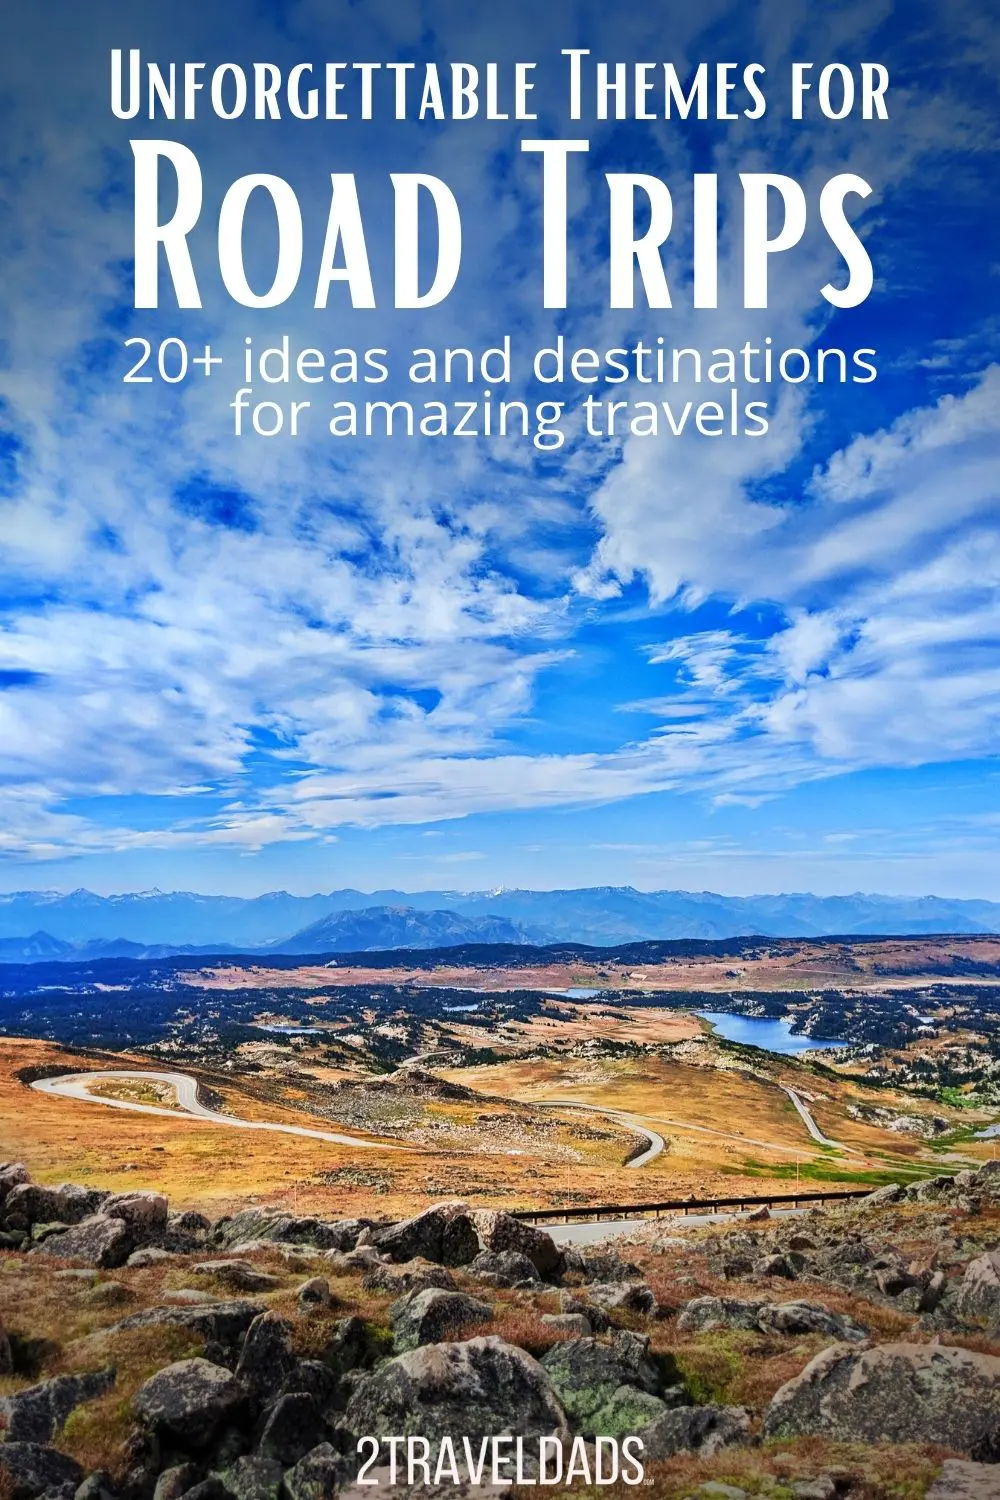 20+ themes for road trips that you will never forget. From epic photography journeys to family fun or romantic vacations, these road trip themes and plans are sure to inspire new and amazing adventures.